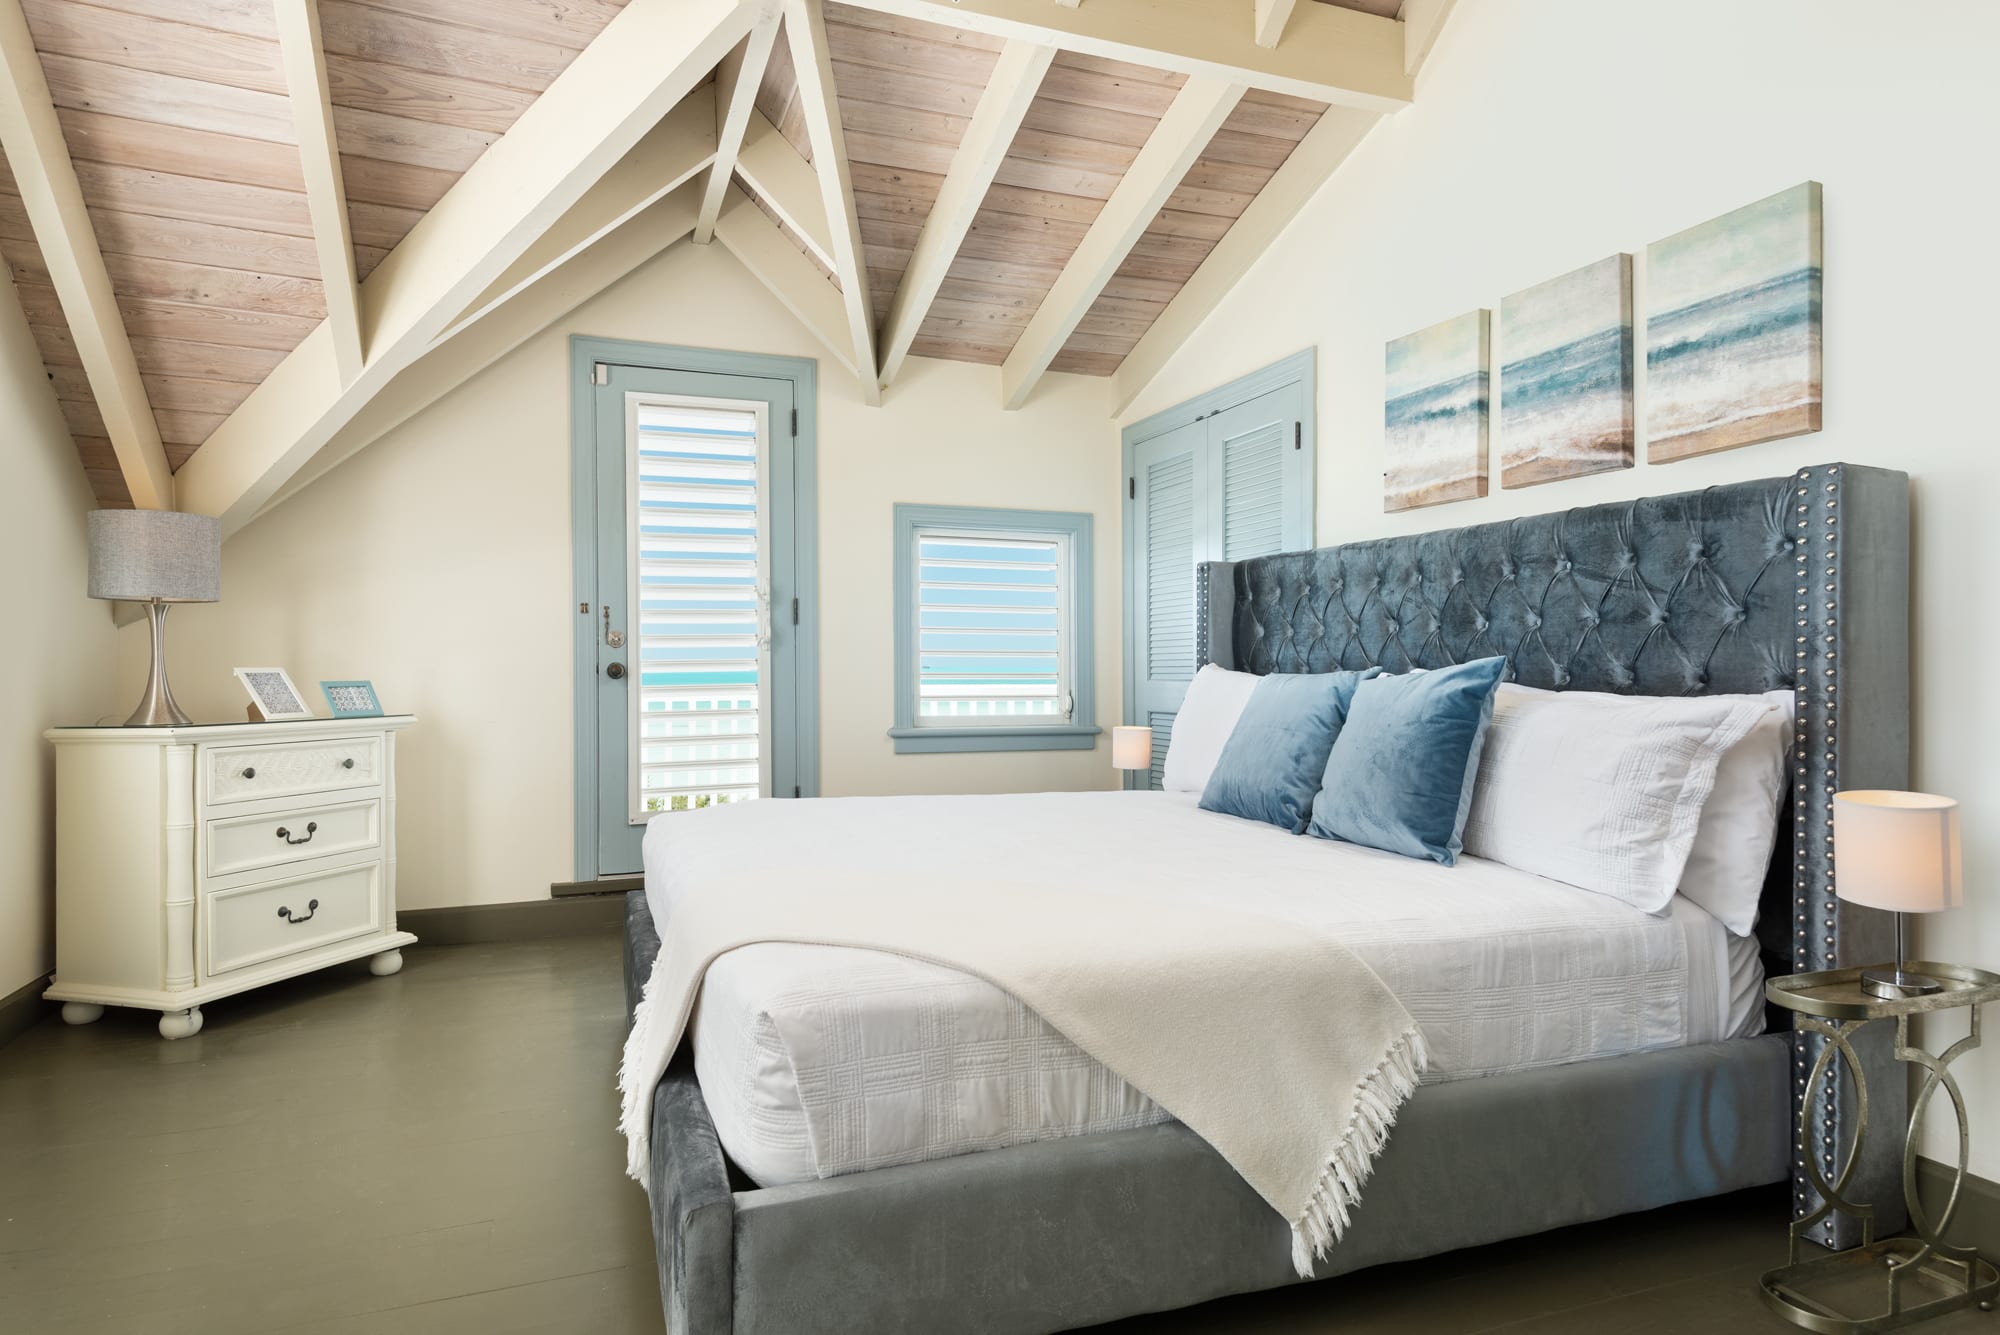 A bedroom in a luxury vacation rental in the Caribbean